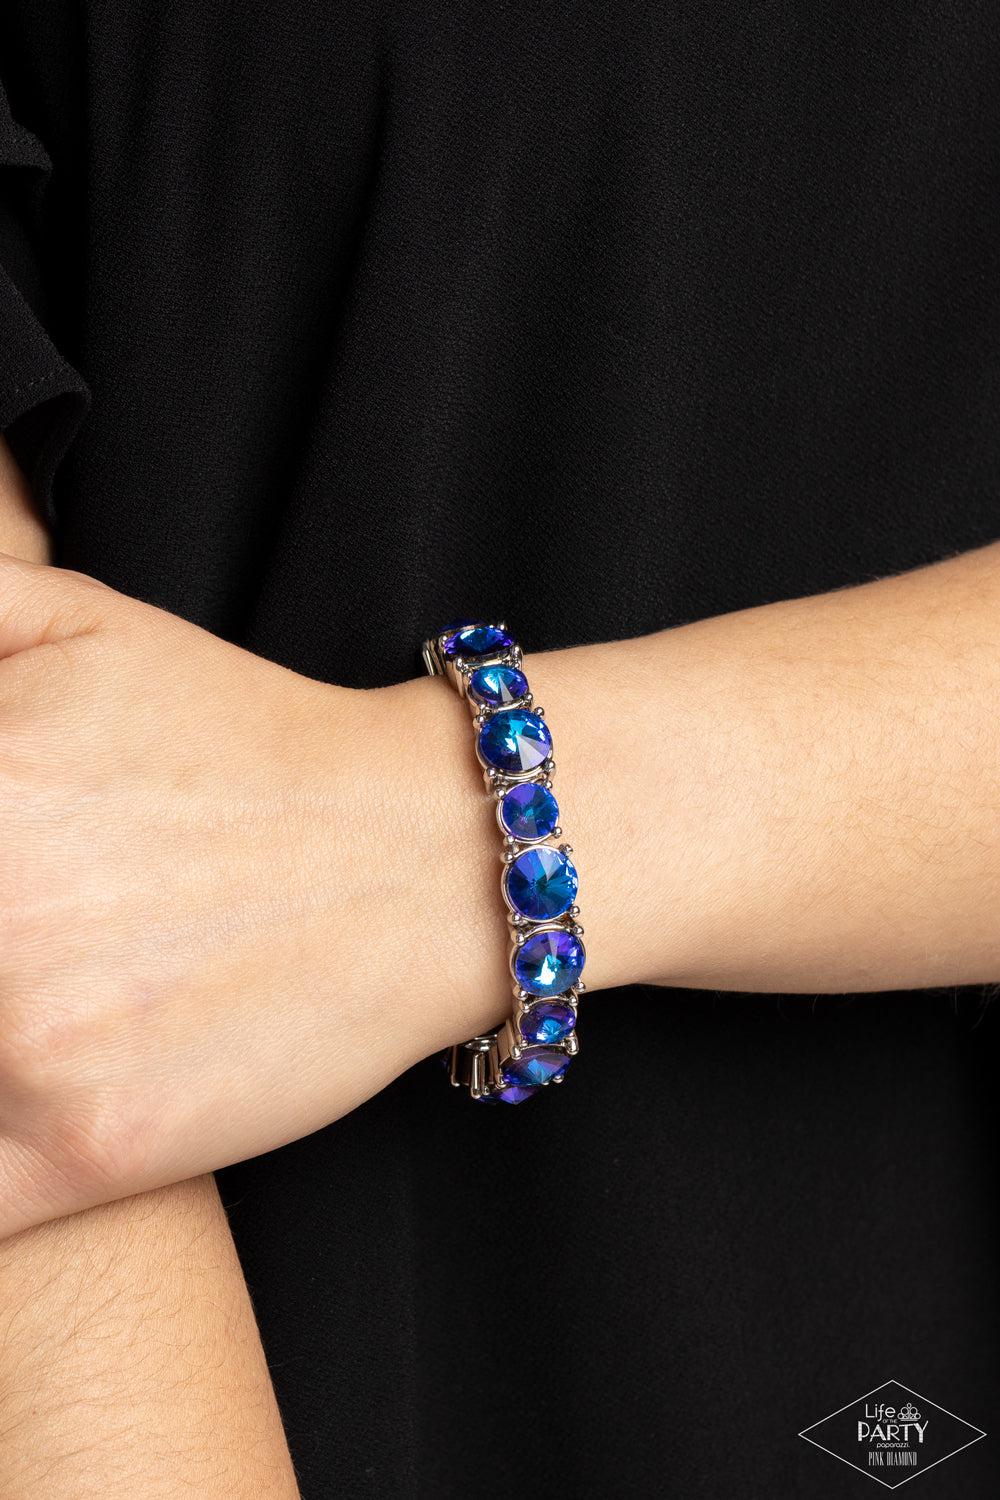 Born To Bedazzle Blue Oil Spill Rhinestone Bracelet - Paparazzi Accessories- lightbox - CarasShop.com - $5 Jewelry by Cara Jewels